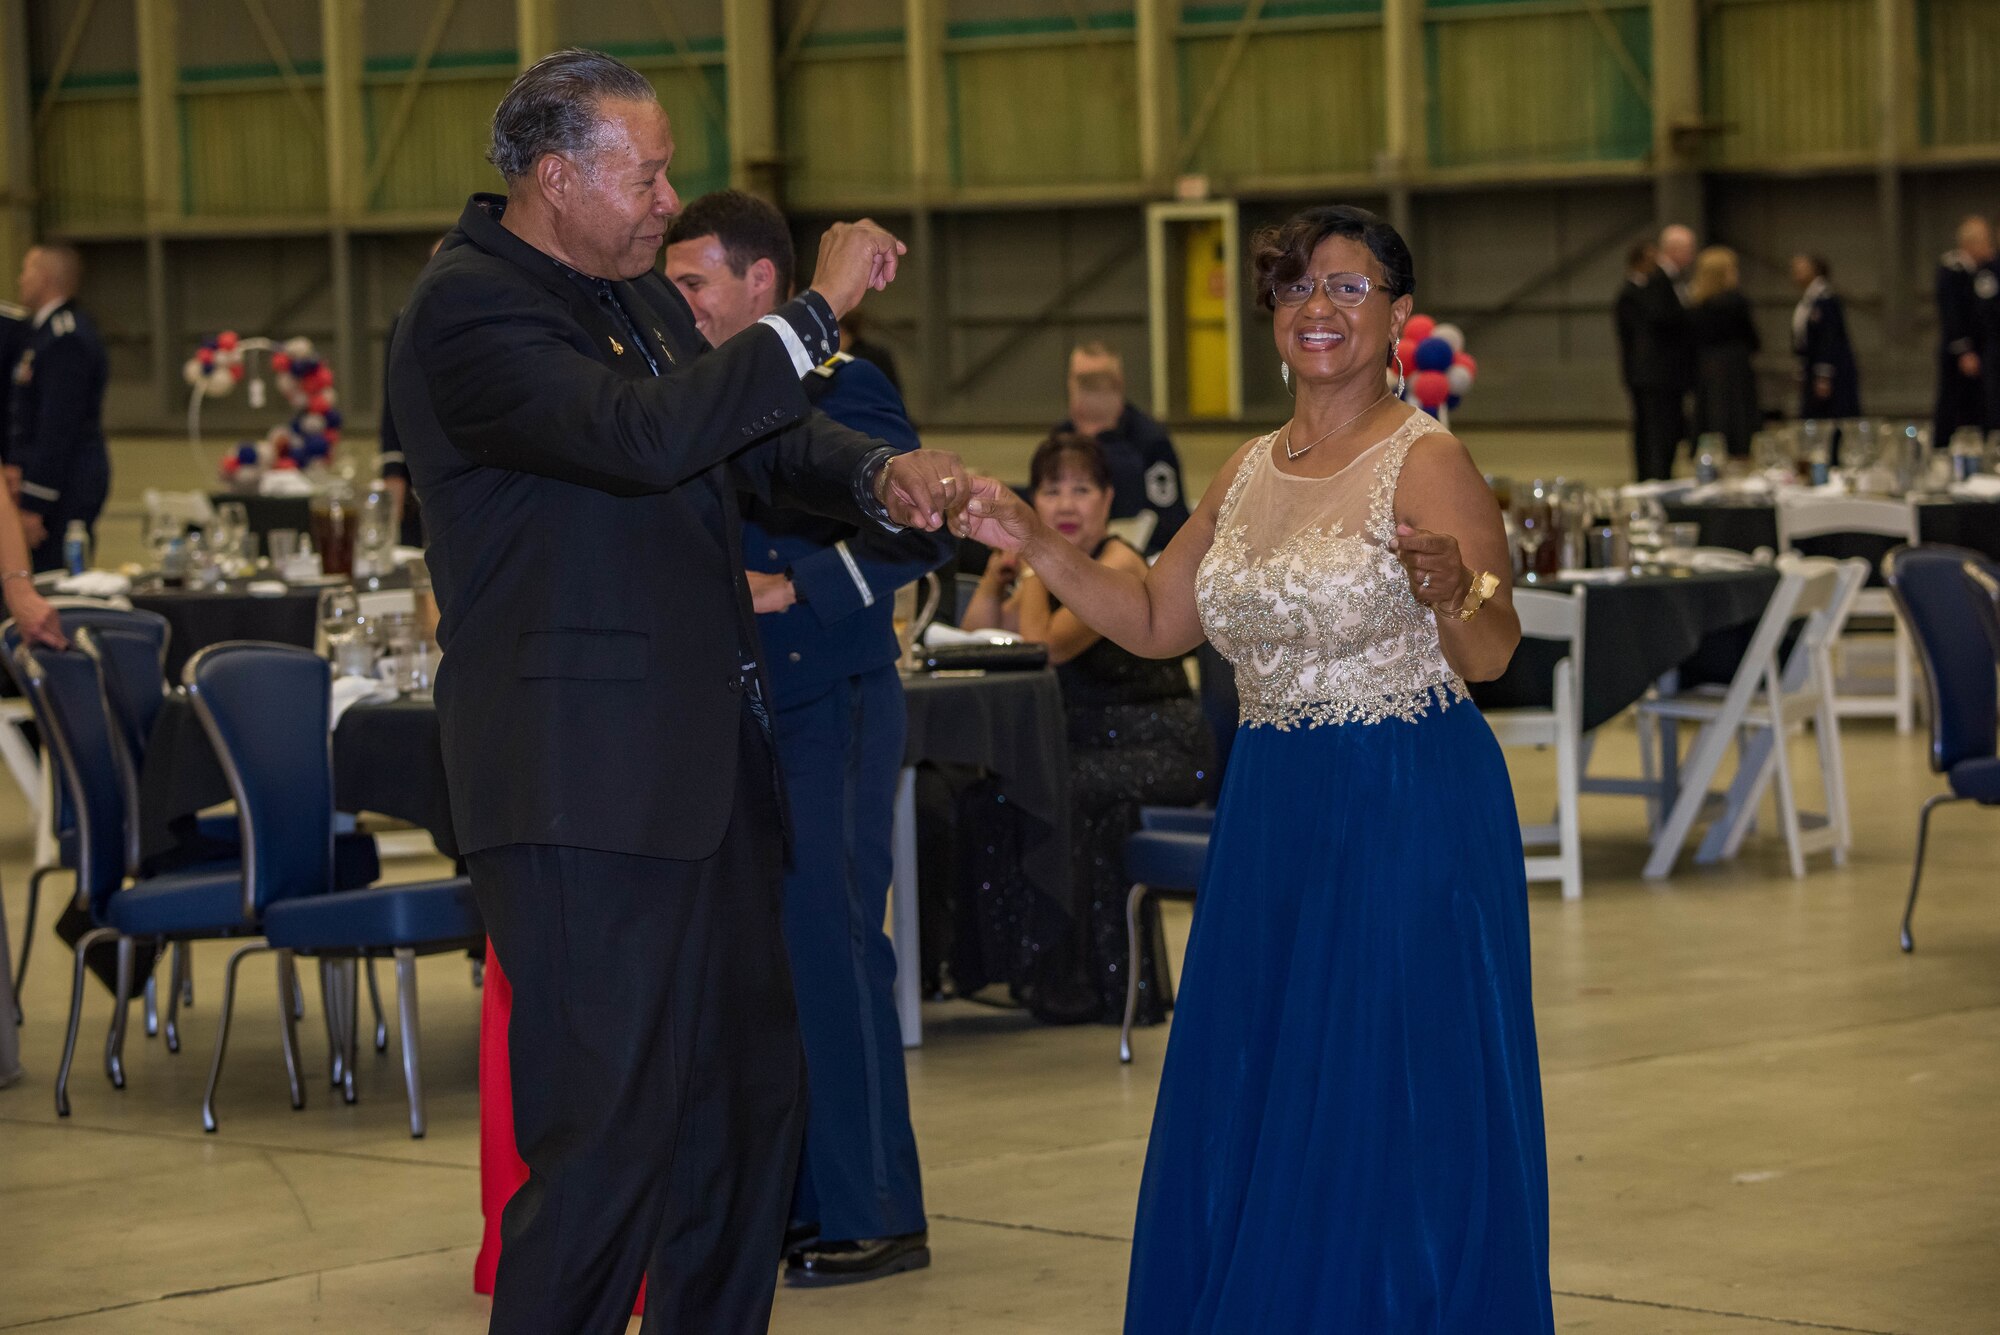 Coffee4Vets president Juan Blanco and his wife, Atherine, dance during the 2019 Air Force Ball at Edwards Air Force Base, California, Sept. 14. (U.S. Air Force photo by Matt Williams)